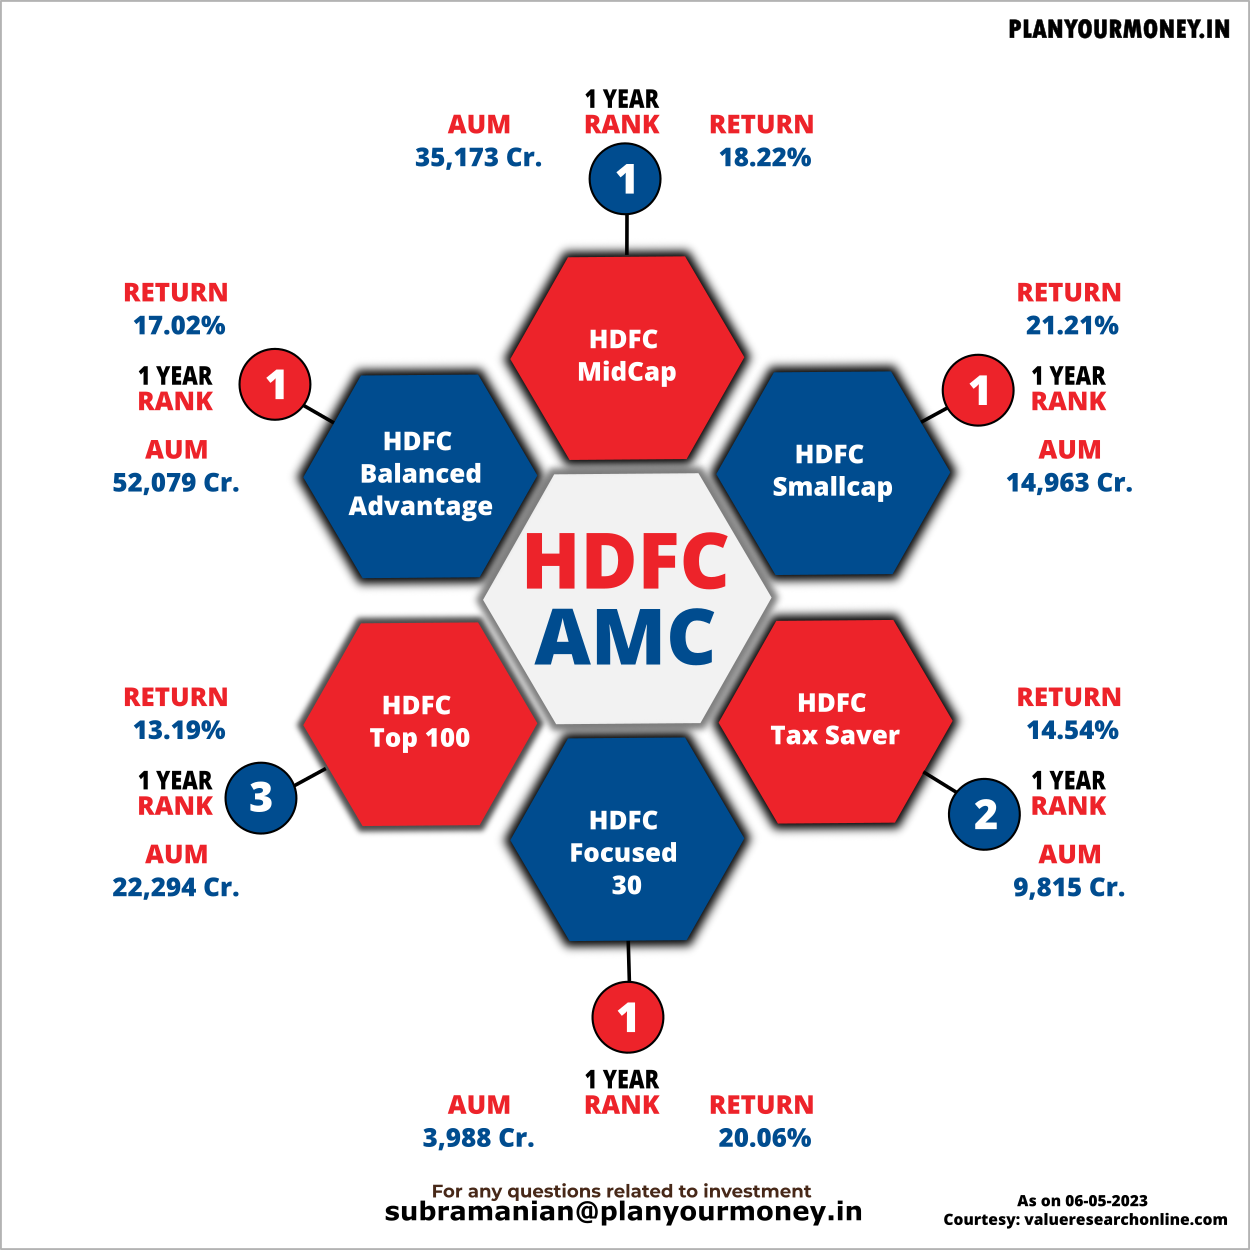 Top performing funds in HDFC AMC